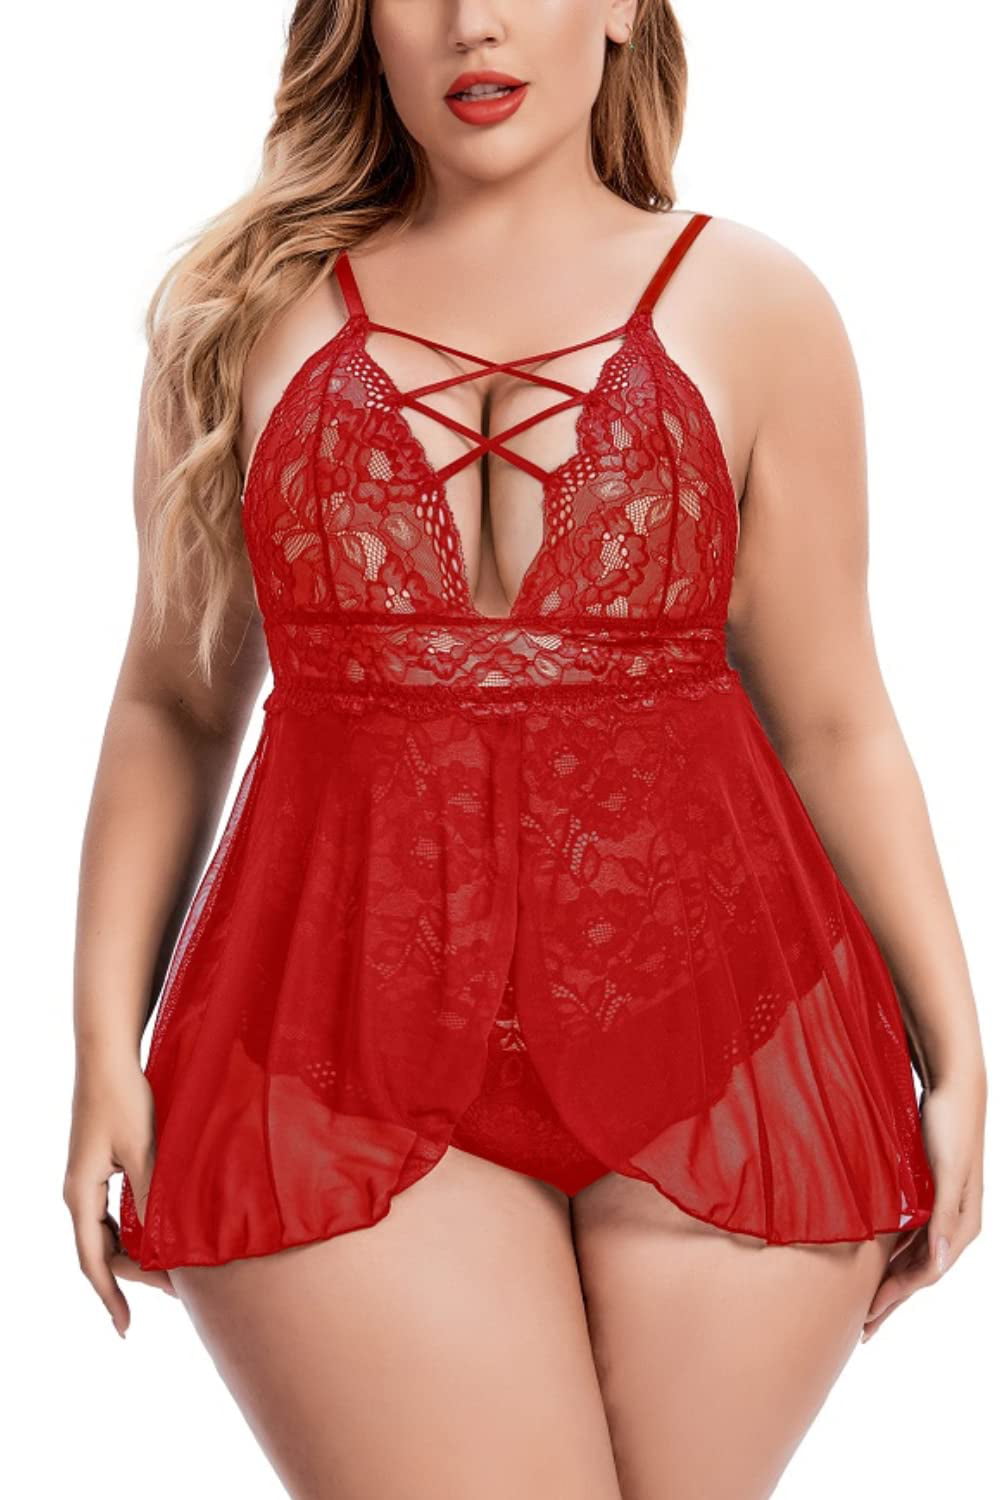 Plus Size Babydoll for Women Double Layer Elastic High Waist Teddy Chemise Comfy Floral Lace Lingerie 